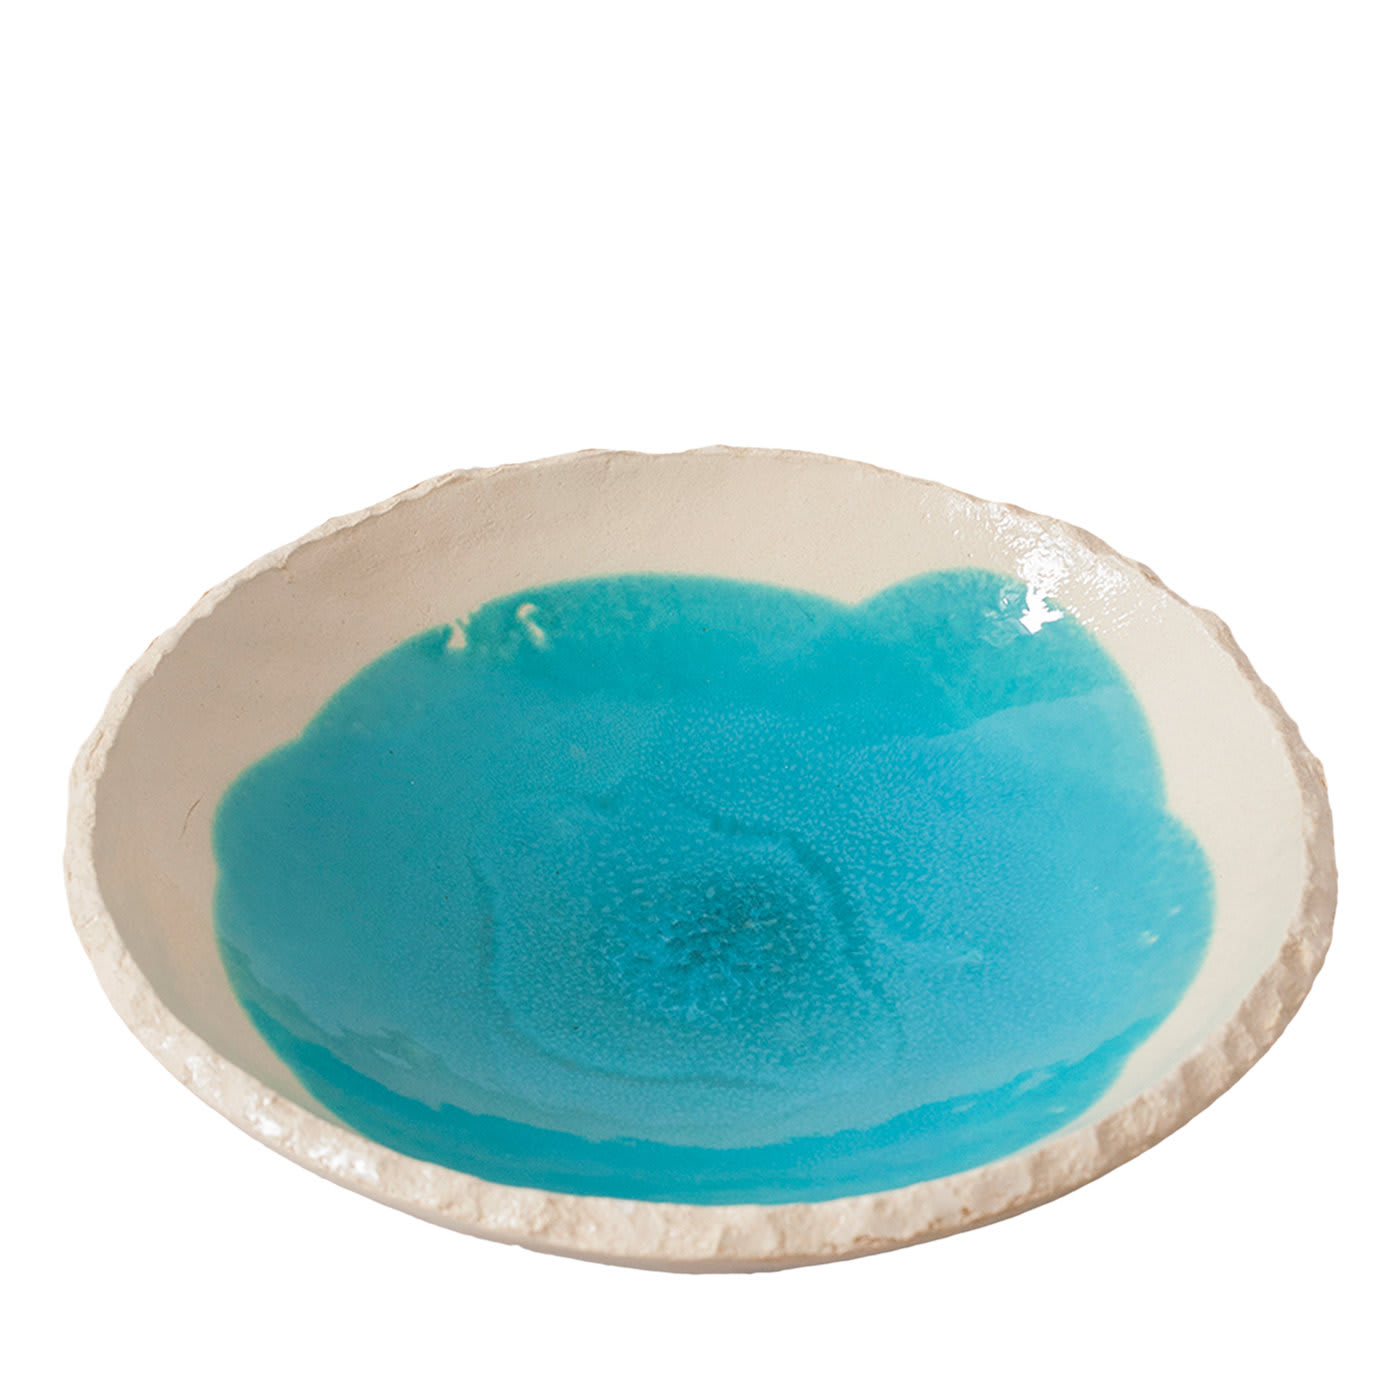 Gusci Large Turquoise Bowl - Gianfranco Conte